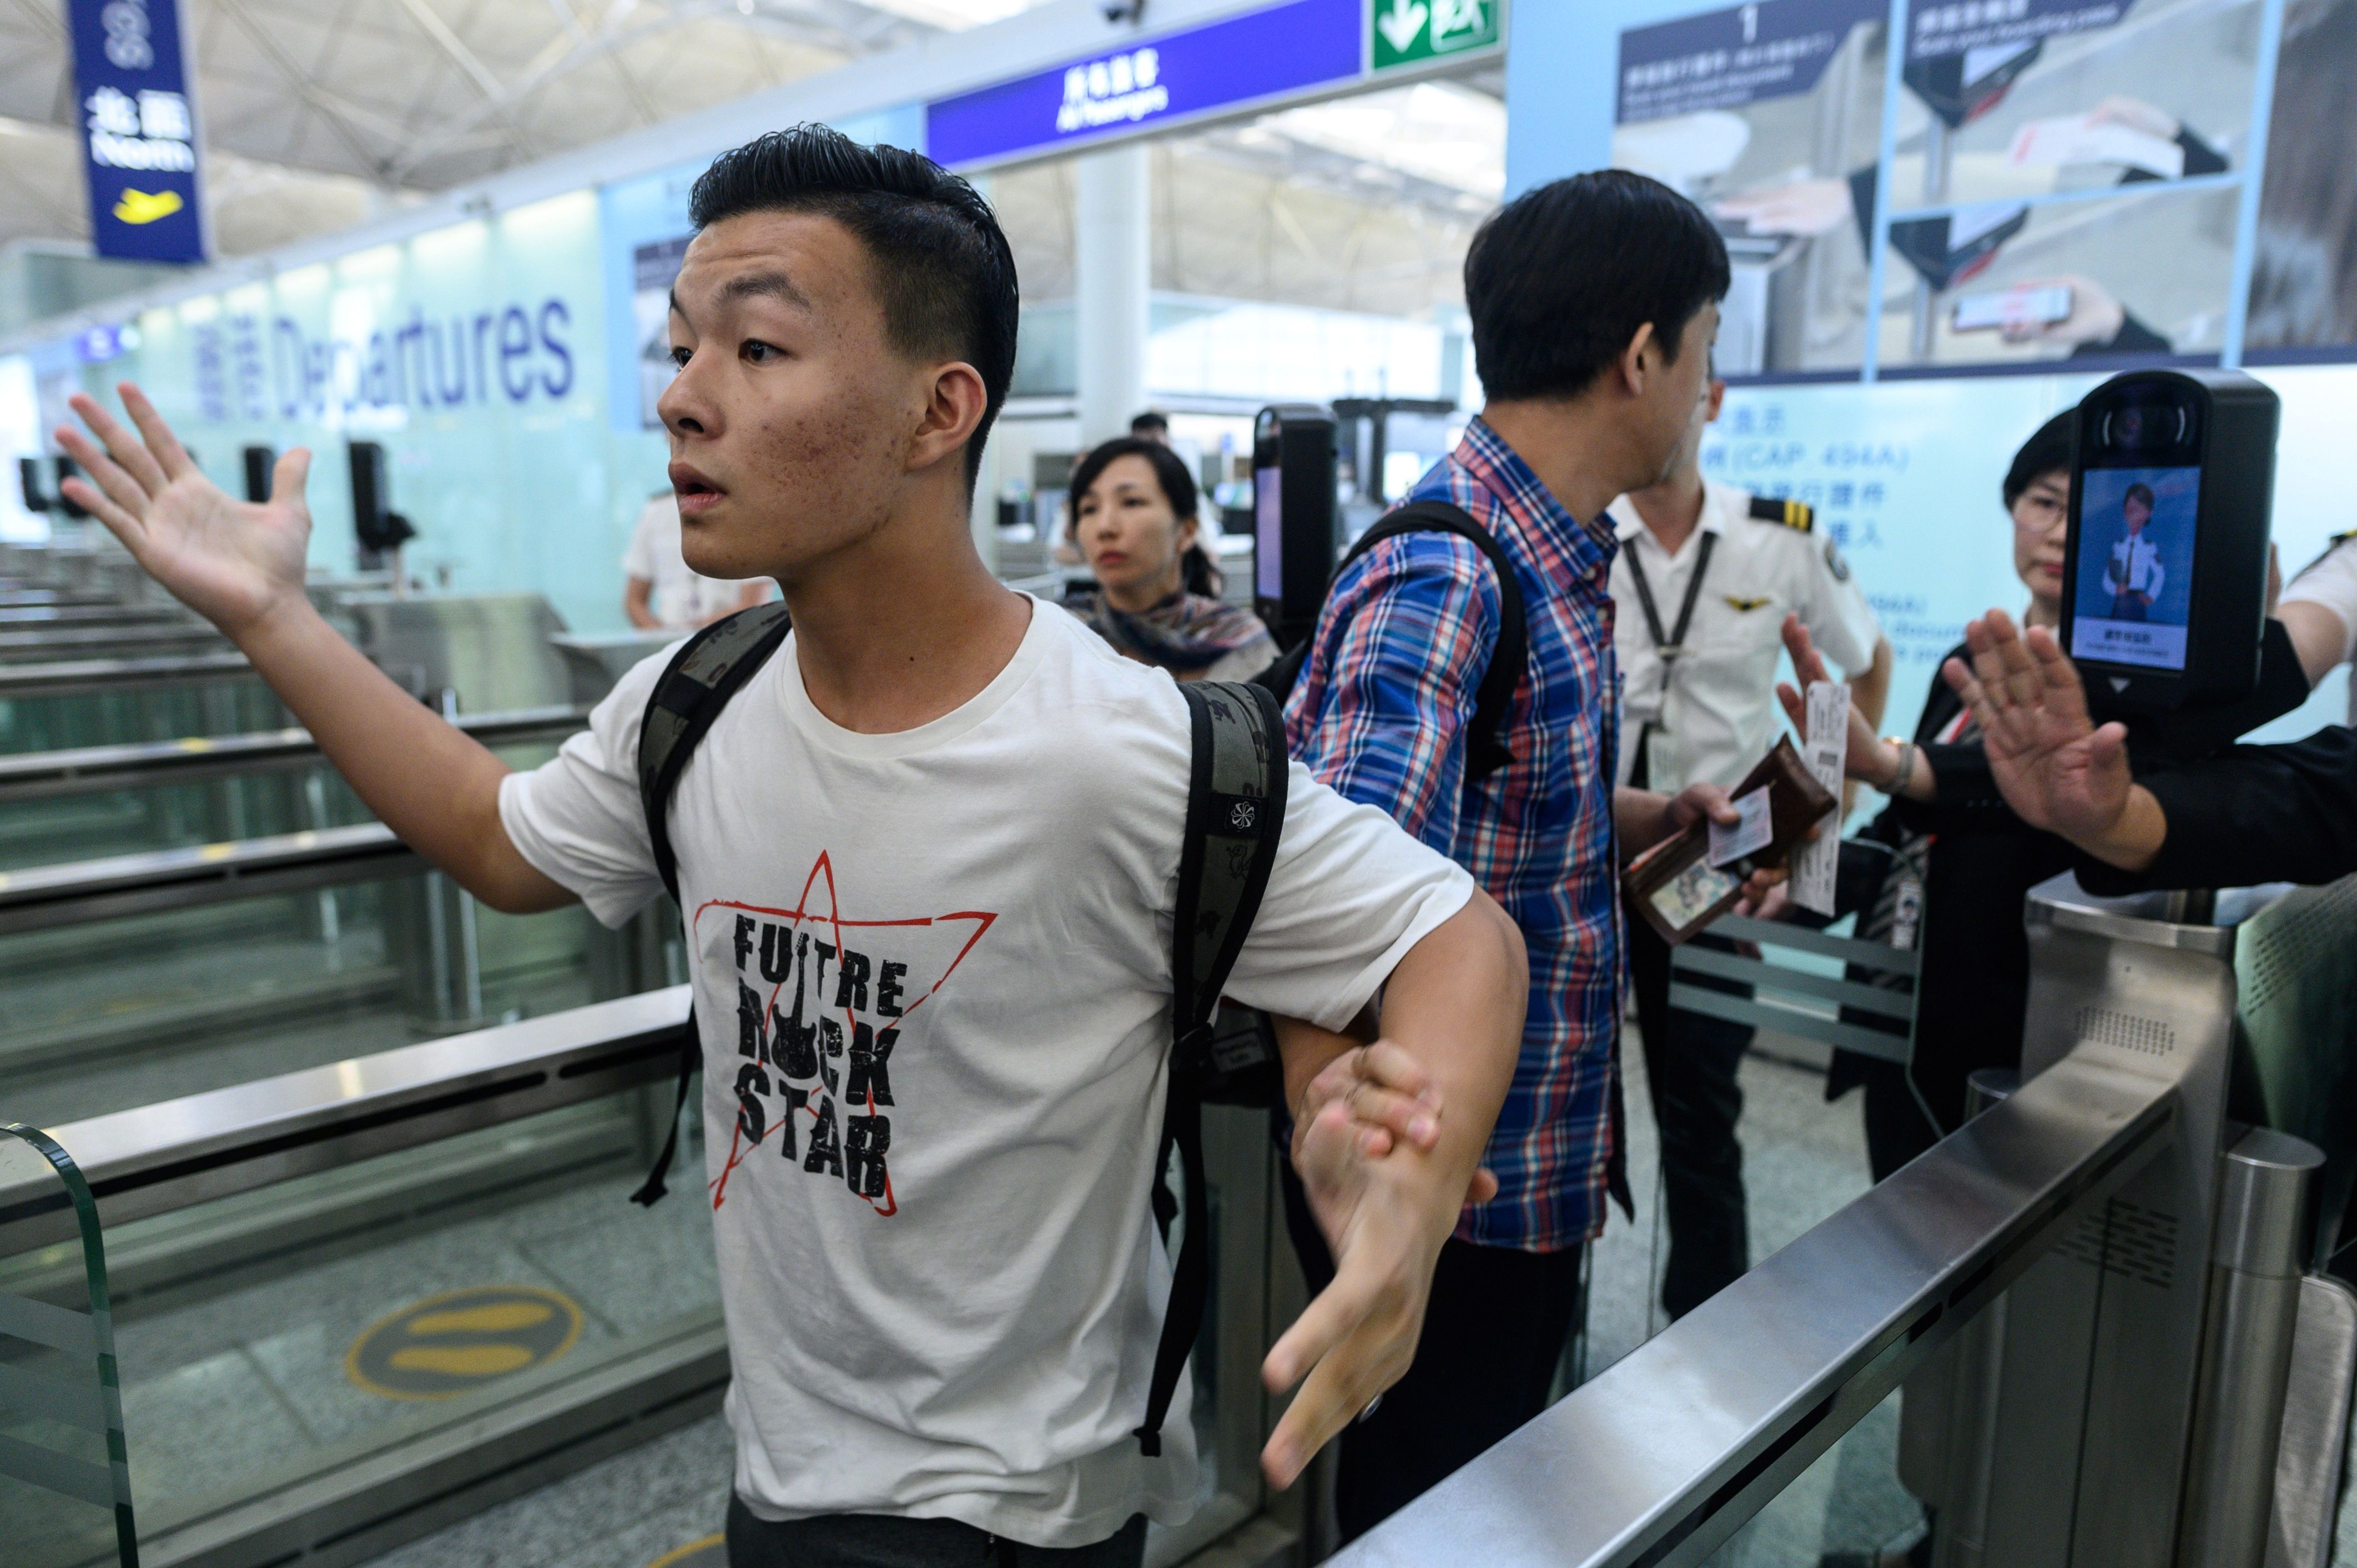 Two travellers react after protesters tried to block them from entering the departures area during another demonstration at Hong Kong's international airport on August 13.